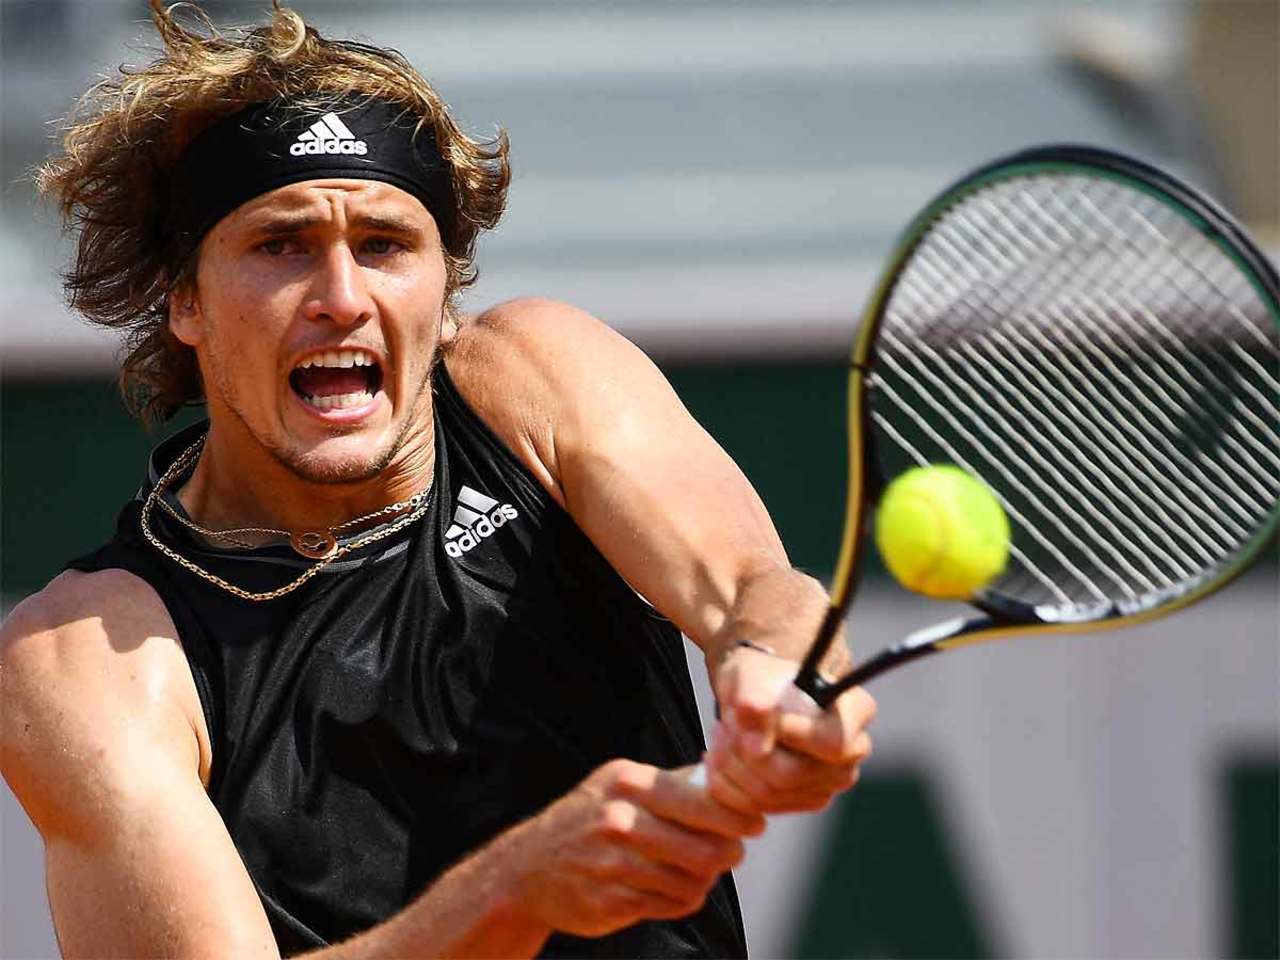 French Open Gritty Zverev ousts Safiullin Tennis News